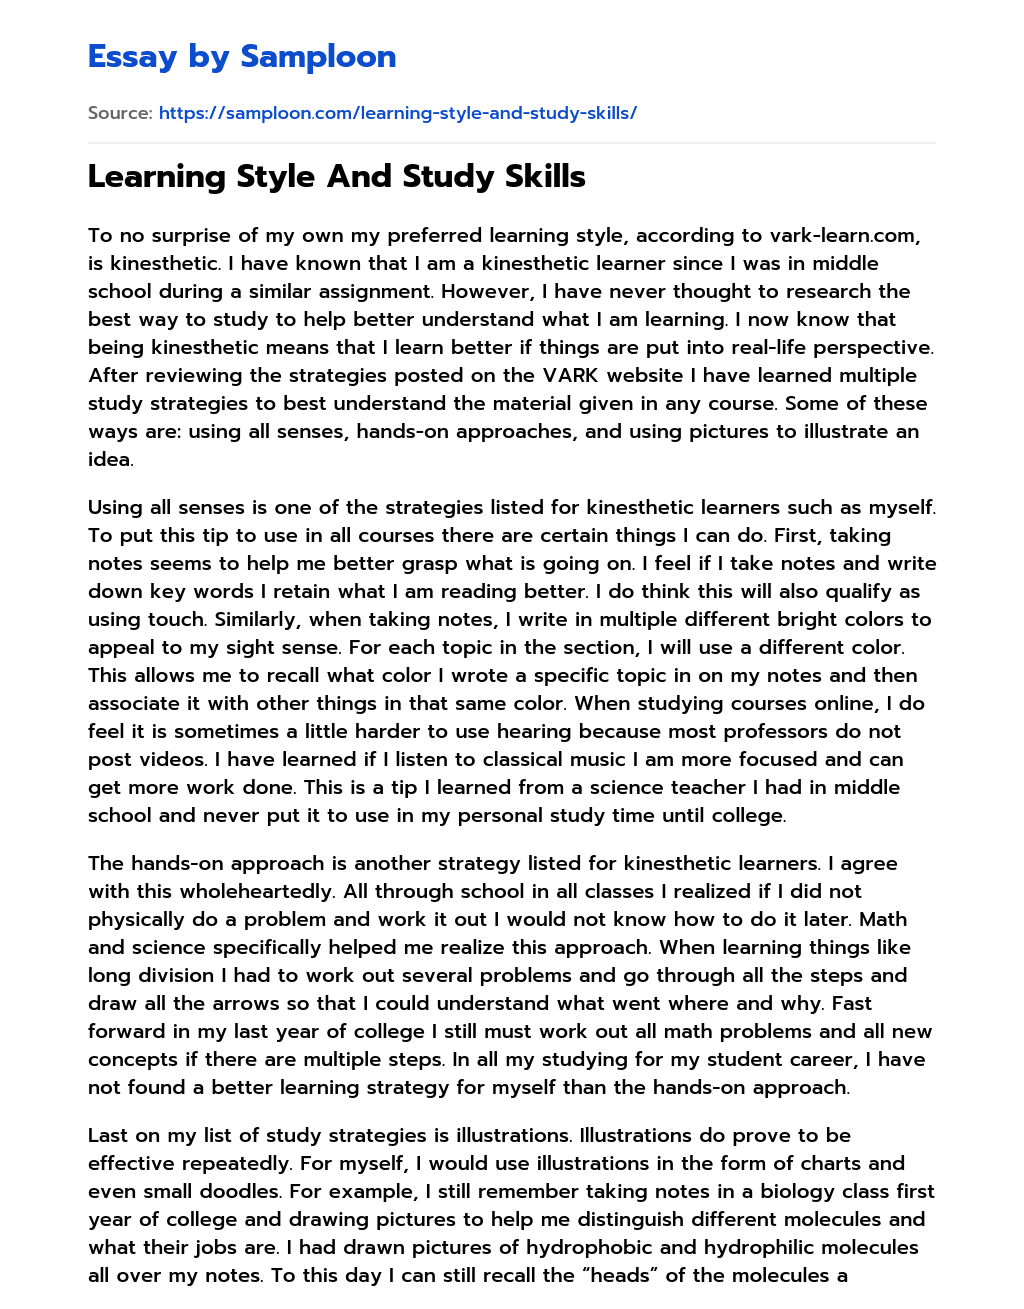 Learning Style And Study Skills essay